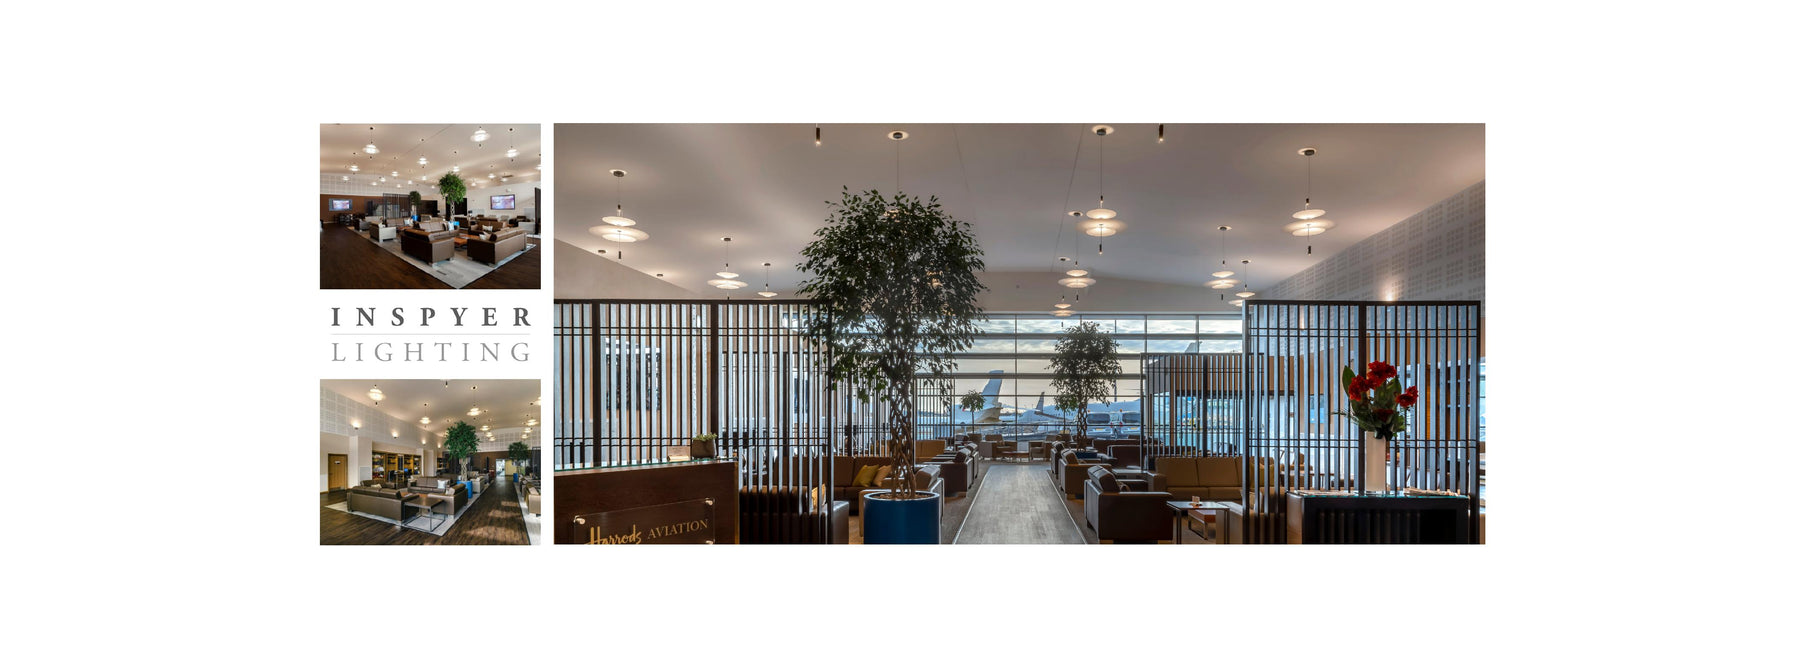 Harrods Aviation appoints Inspyer Lighting to replace departure lounge lighting